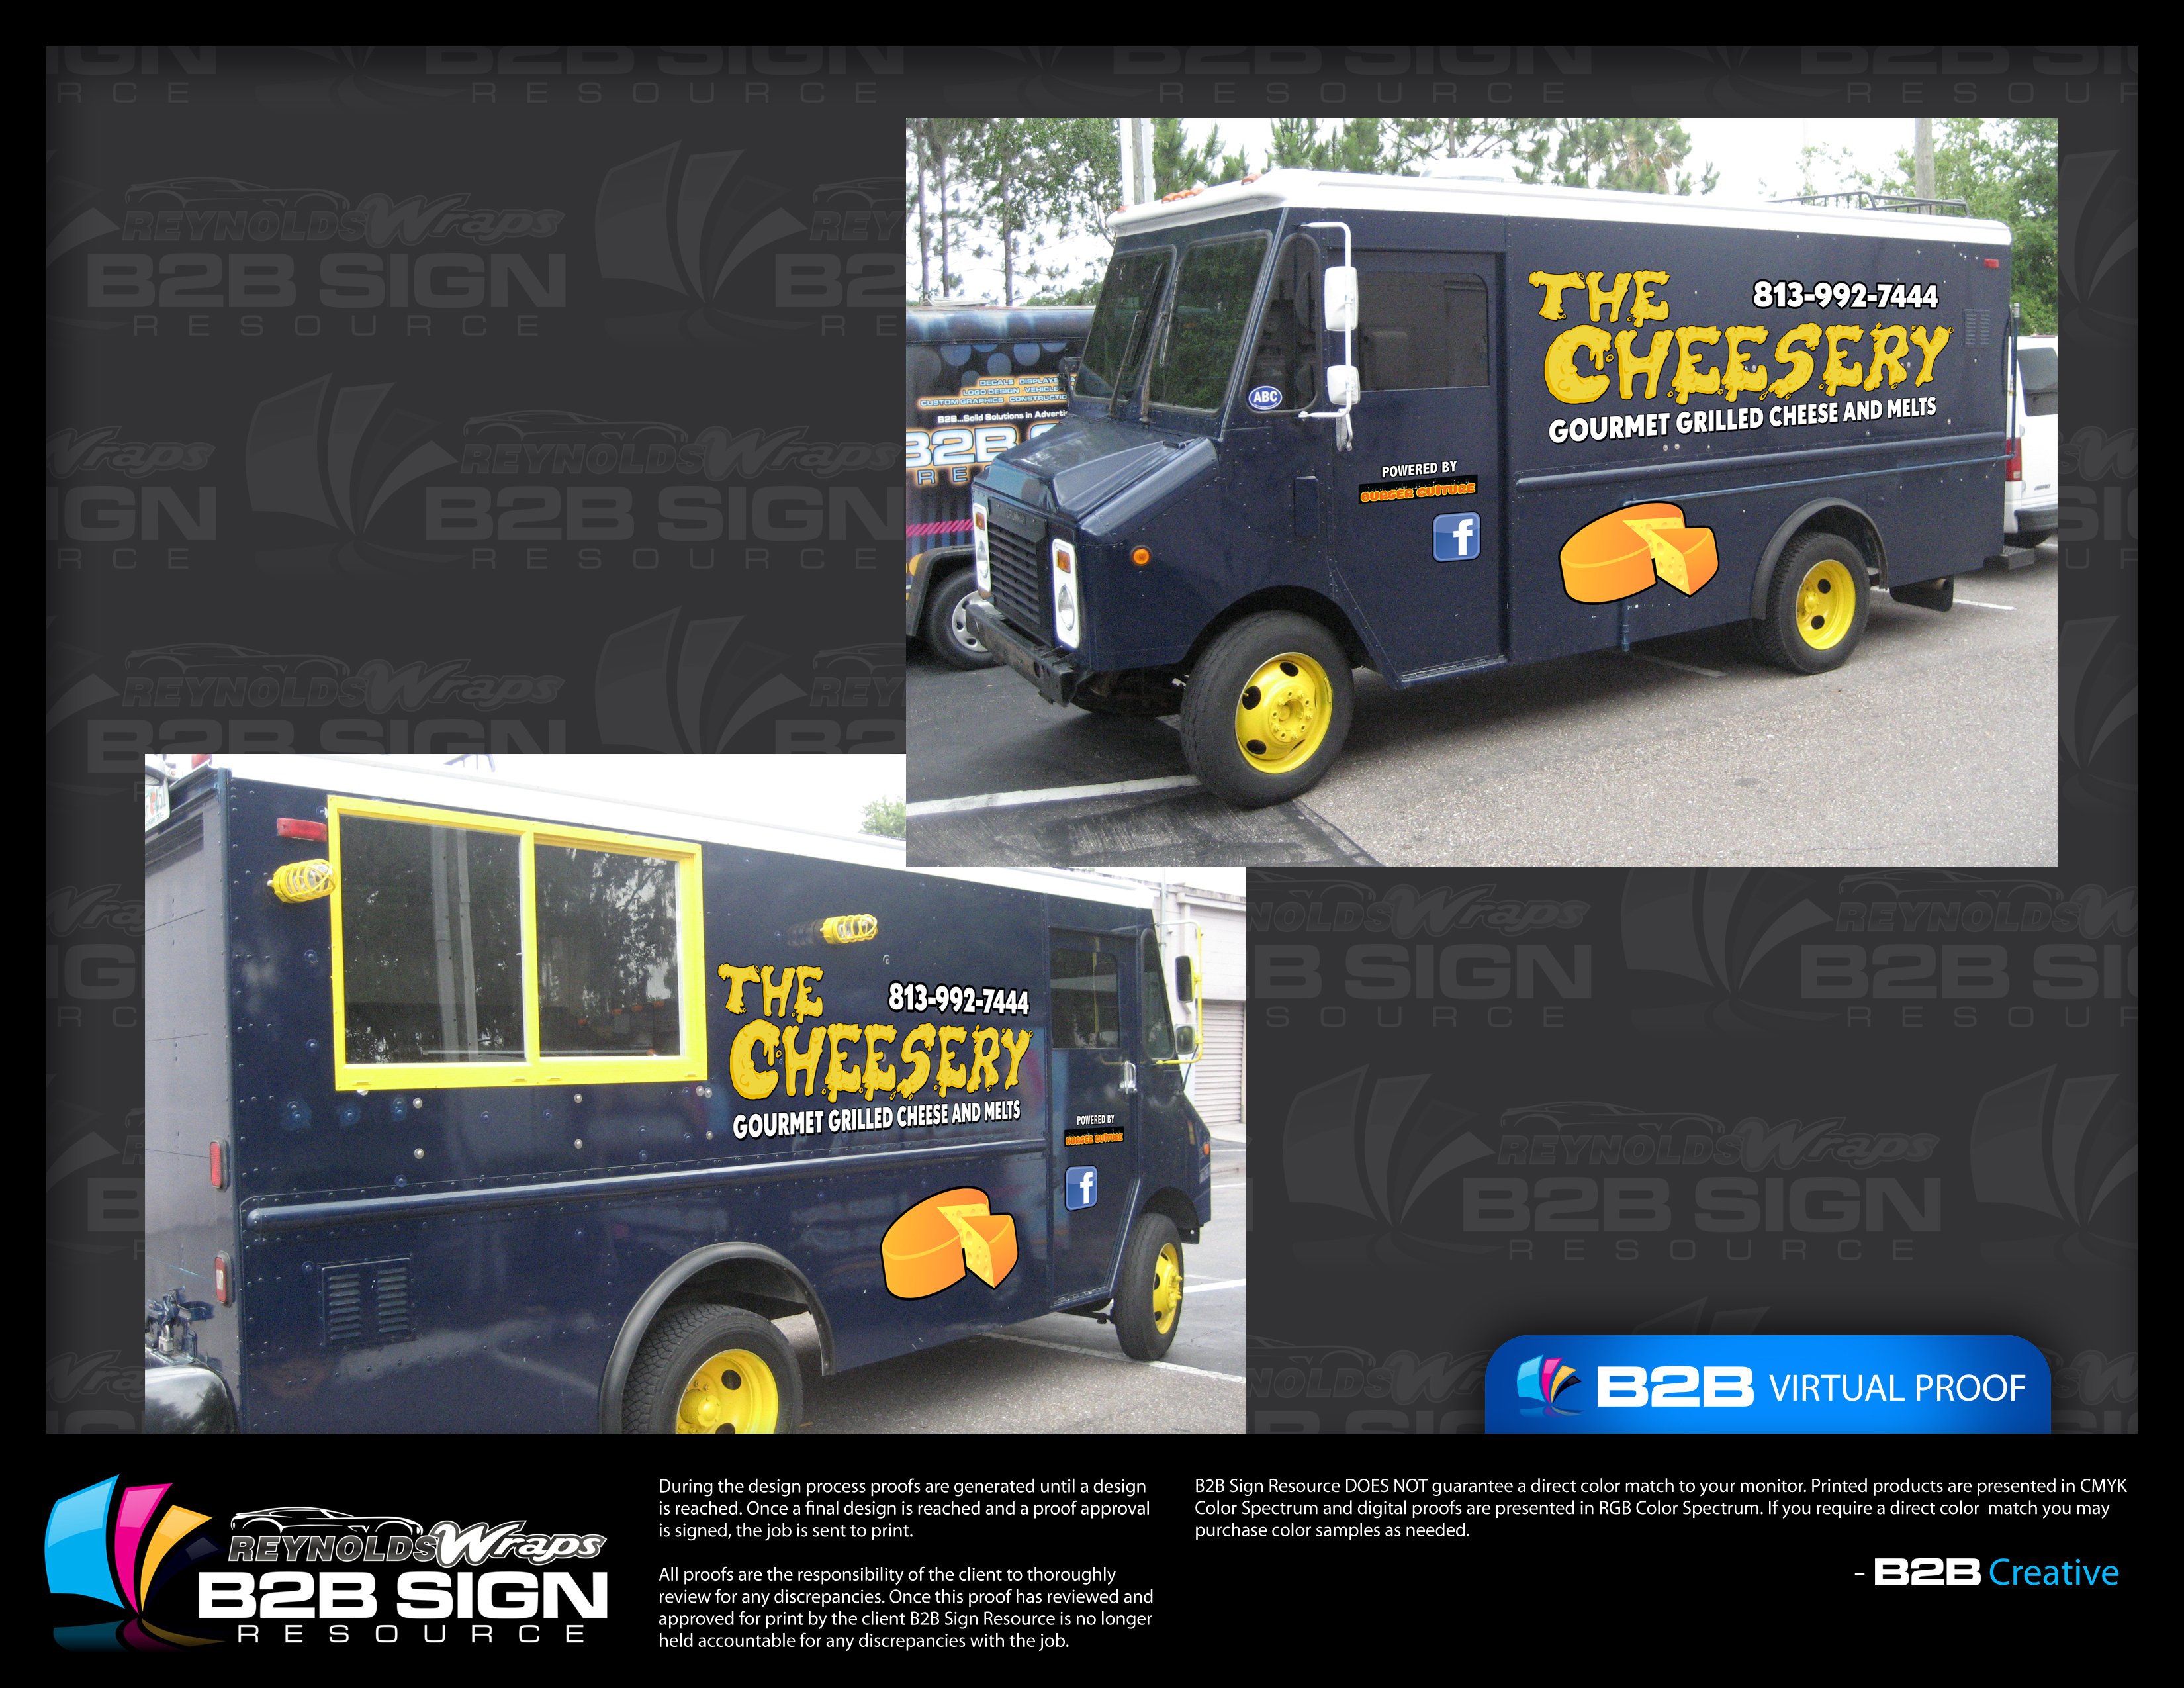 Introducing The Cheesery Truck to Tampa Bay